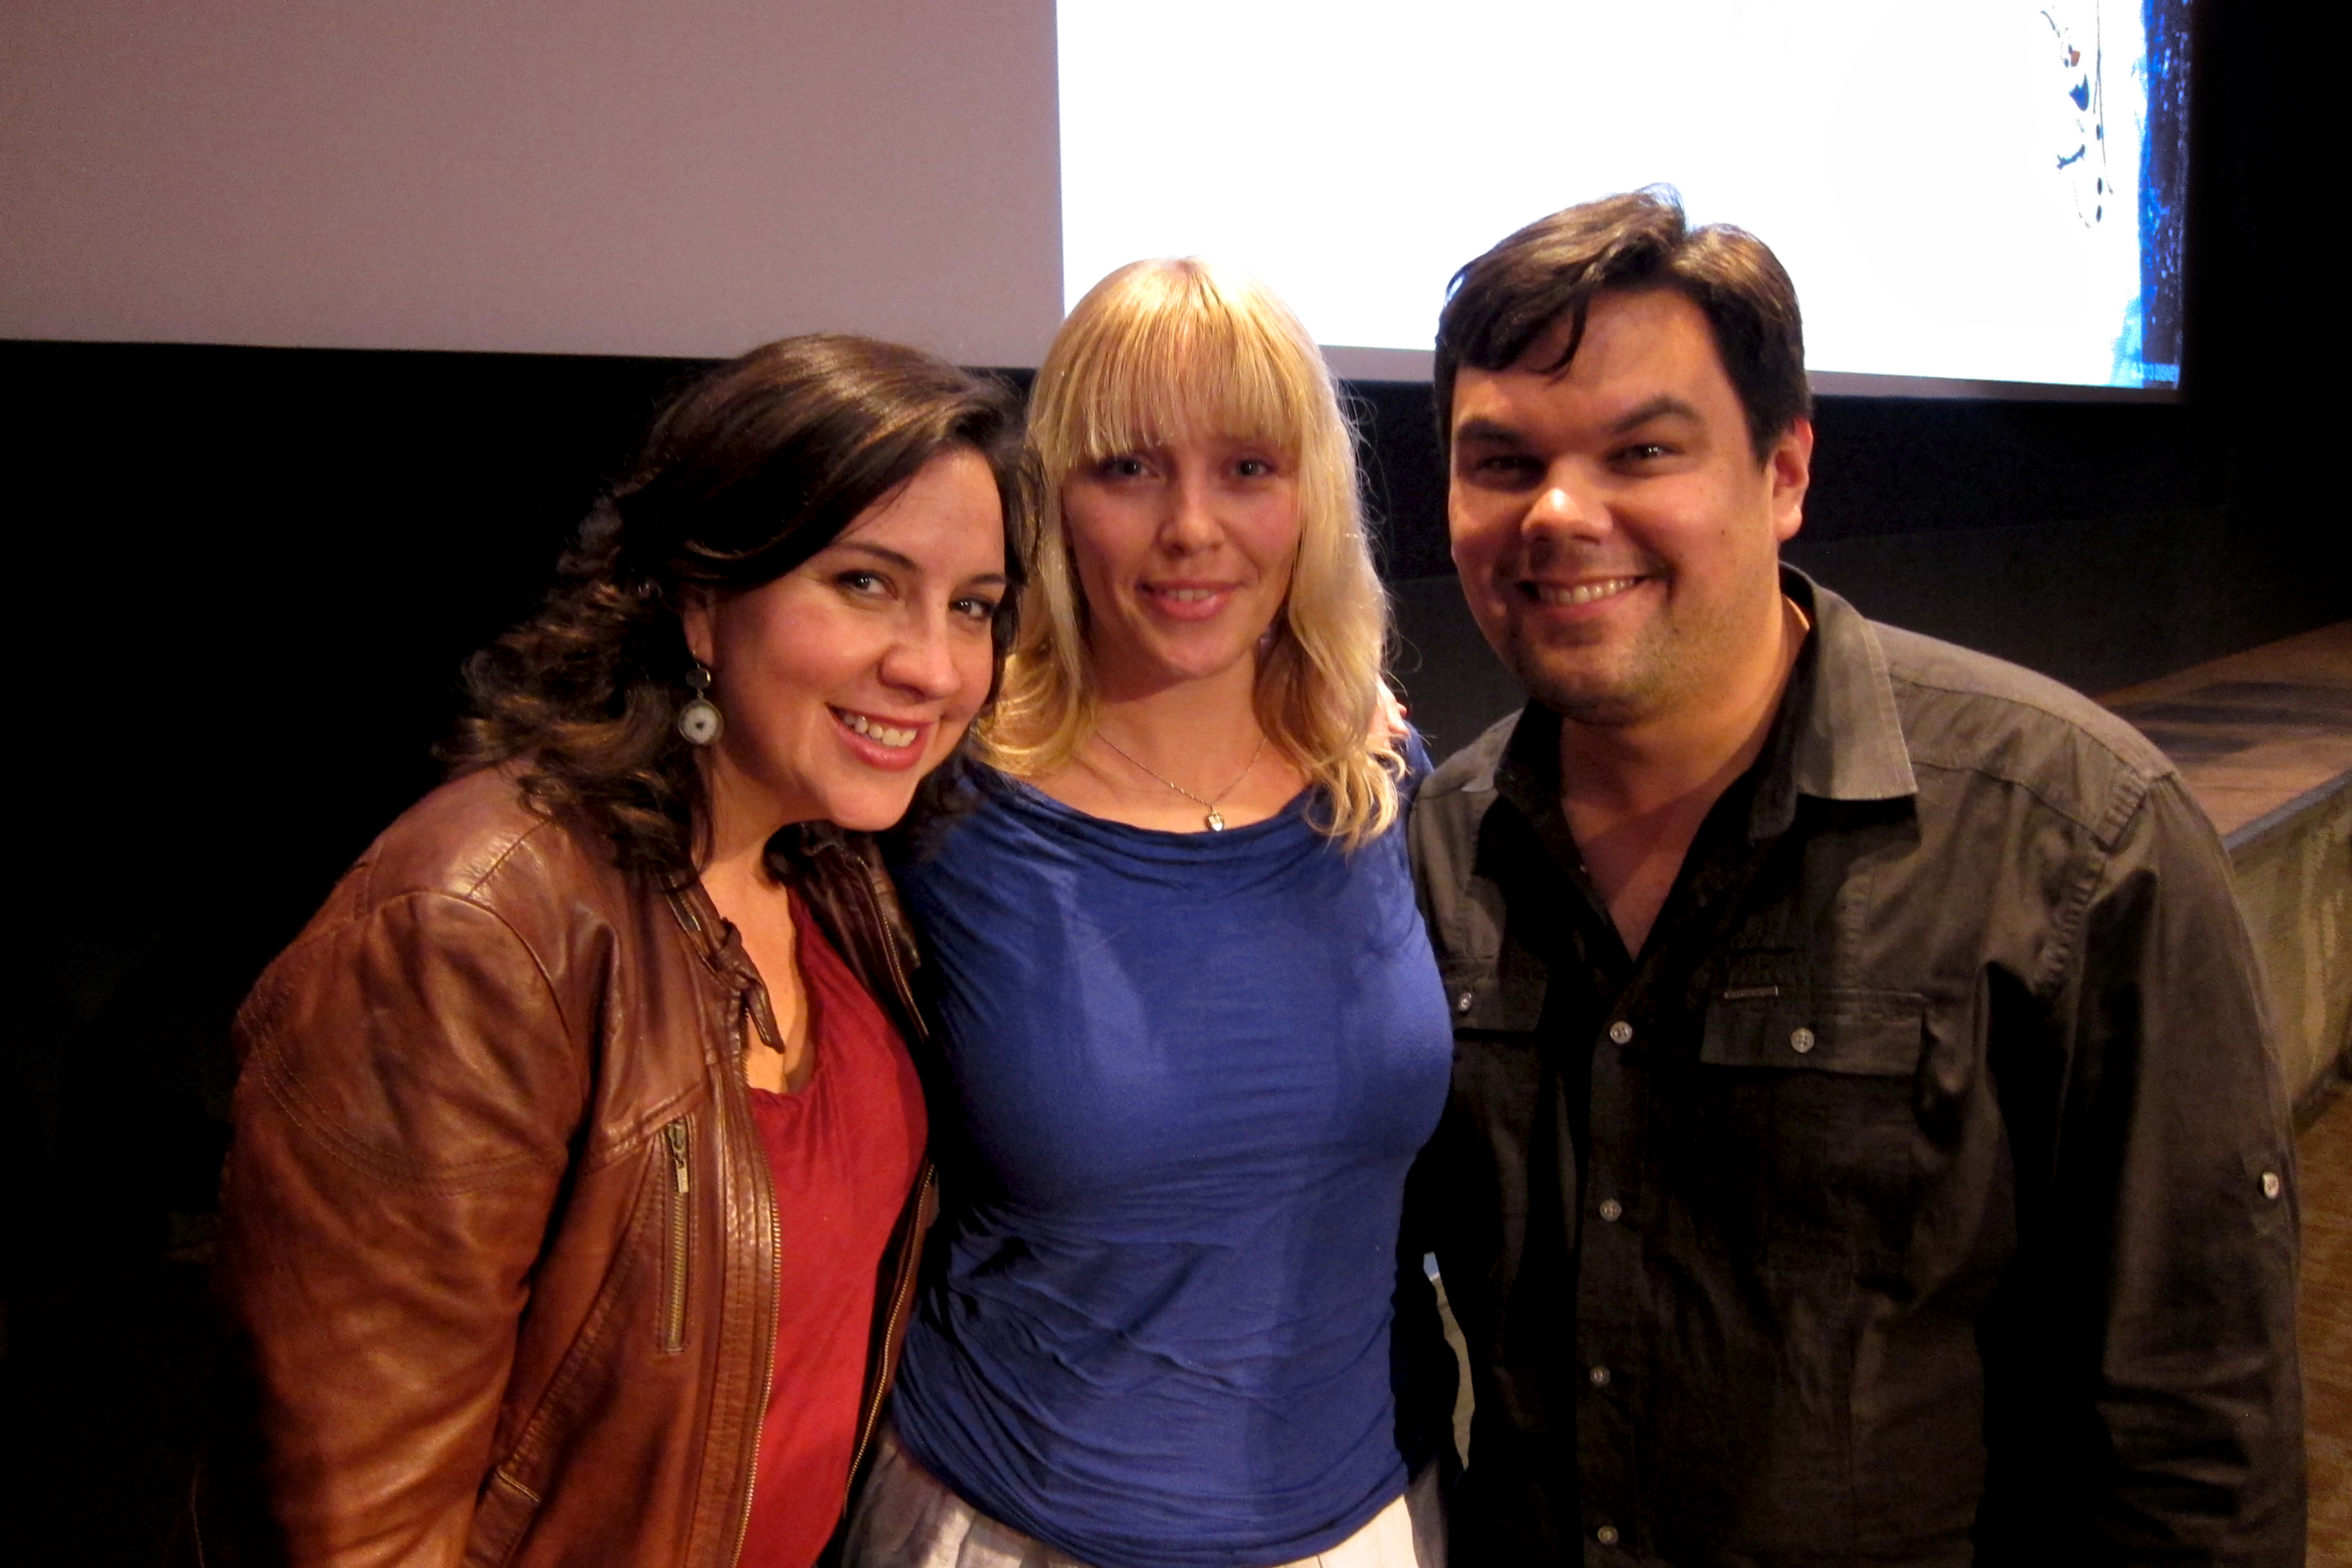 Christine Hals with Oscar winners and Frozen song writers Kristen Anderson-Lopez and Bobby Lopez at a pre-screening of Frozen. Location Disney studios, Burbank.